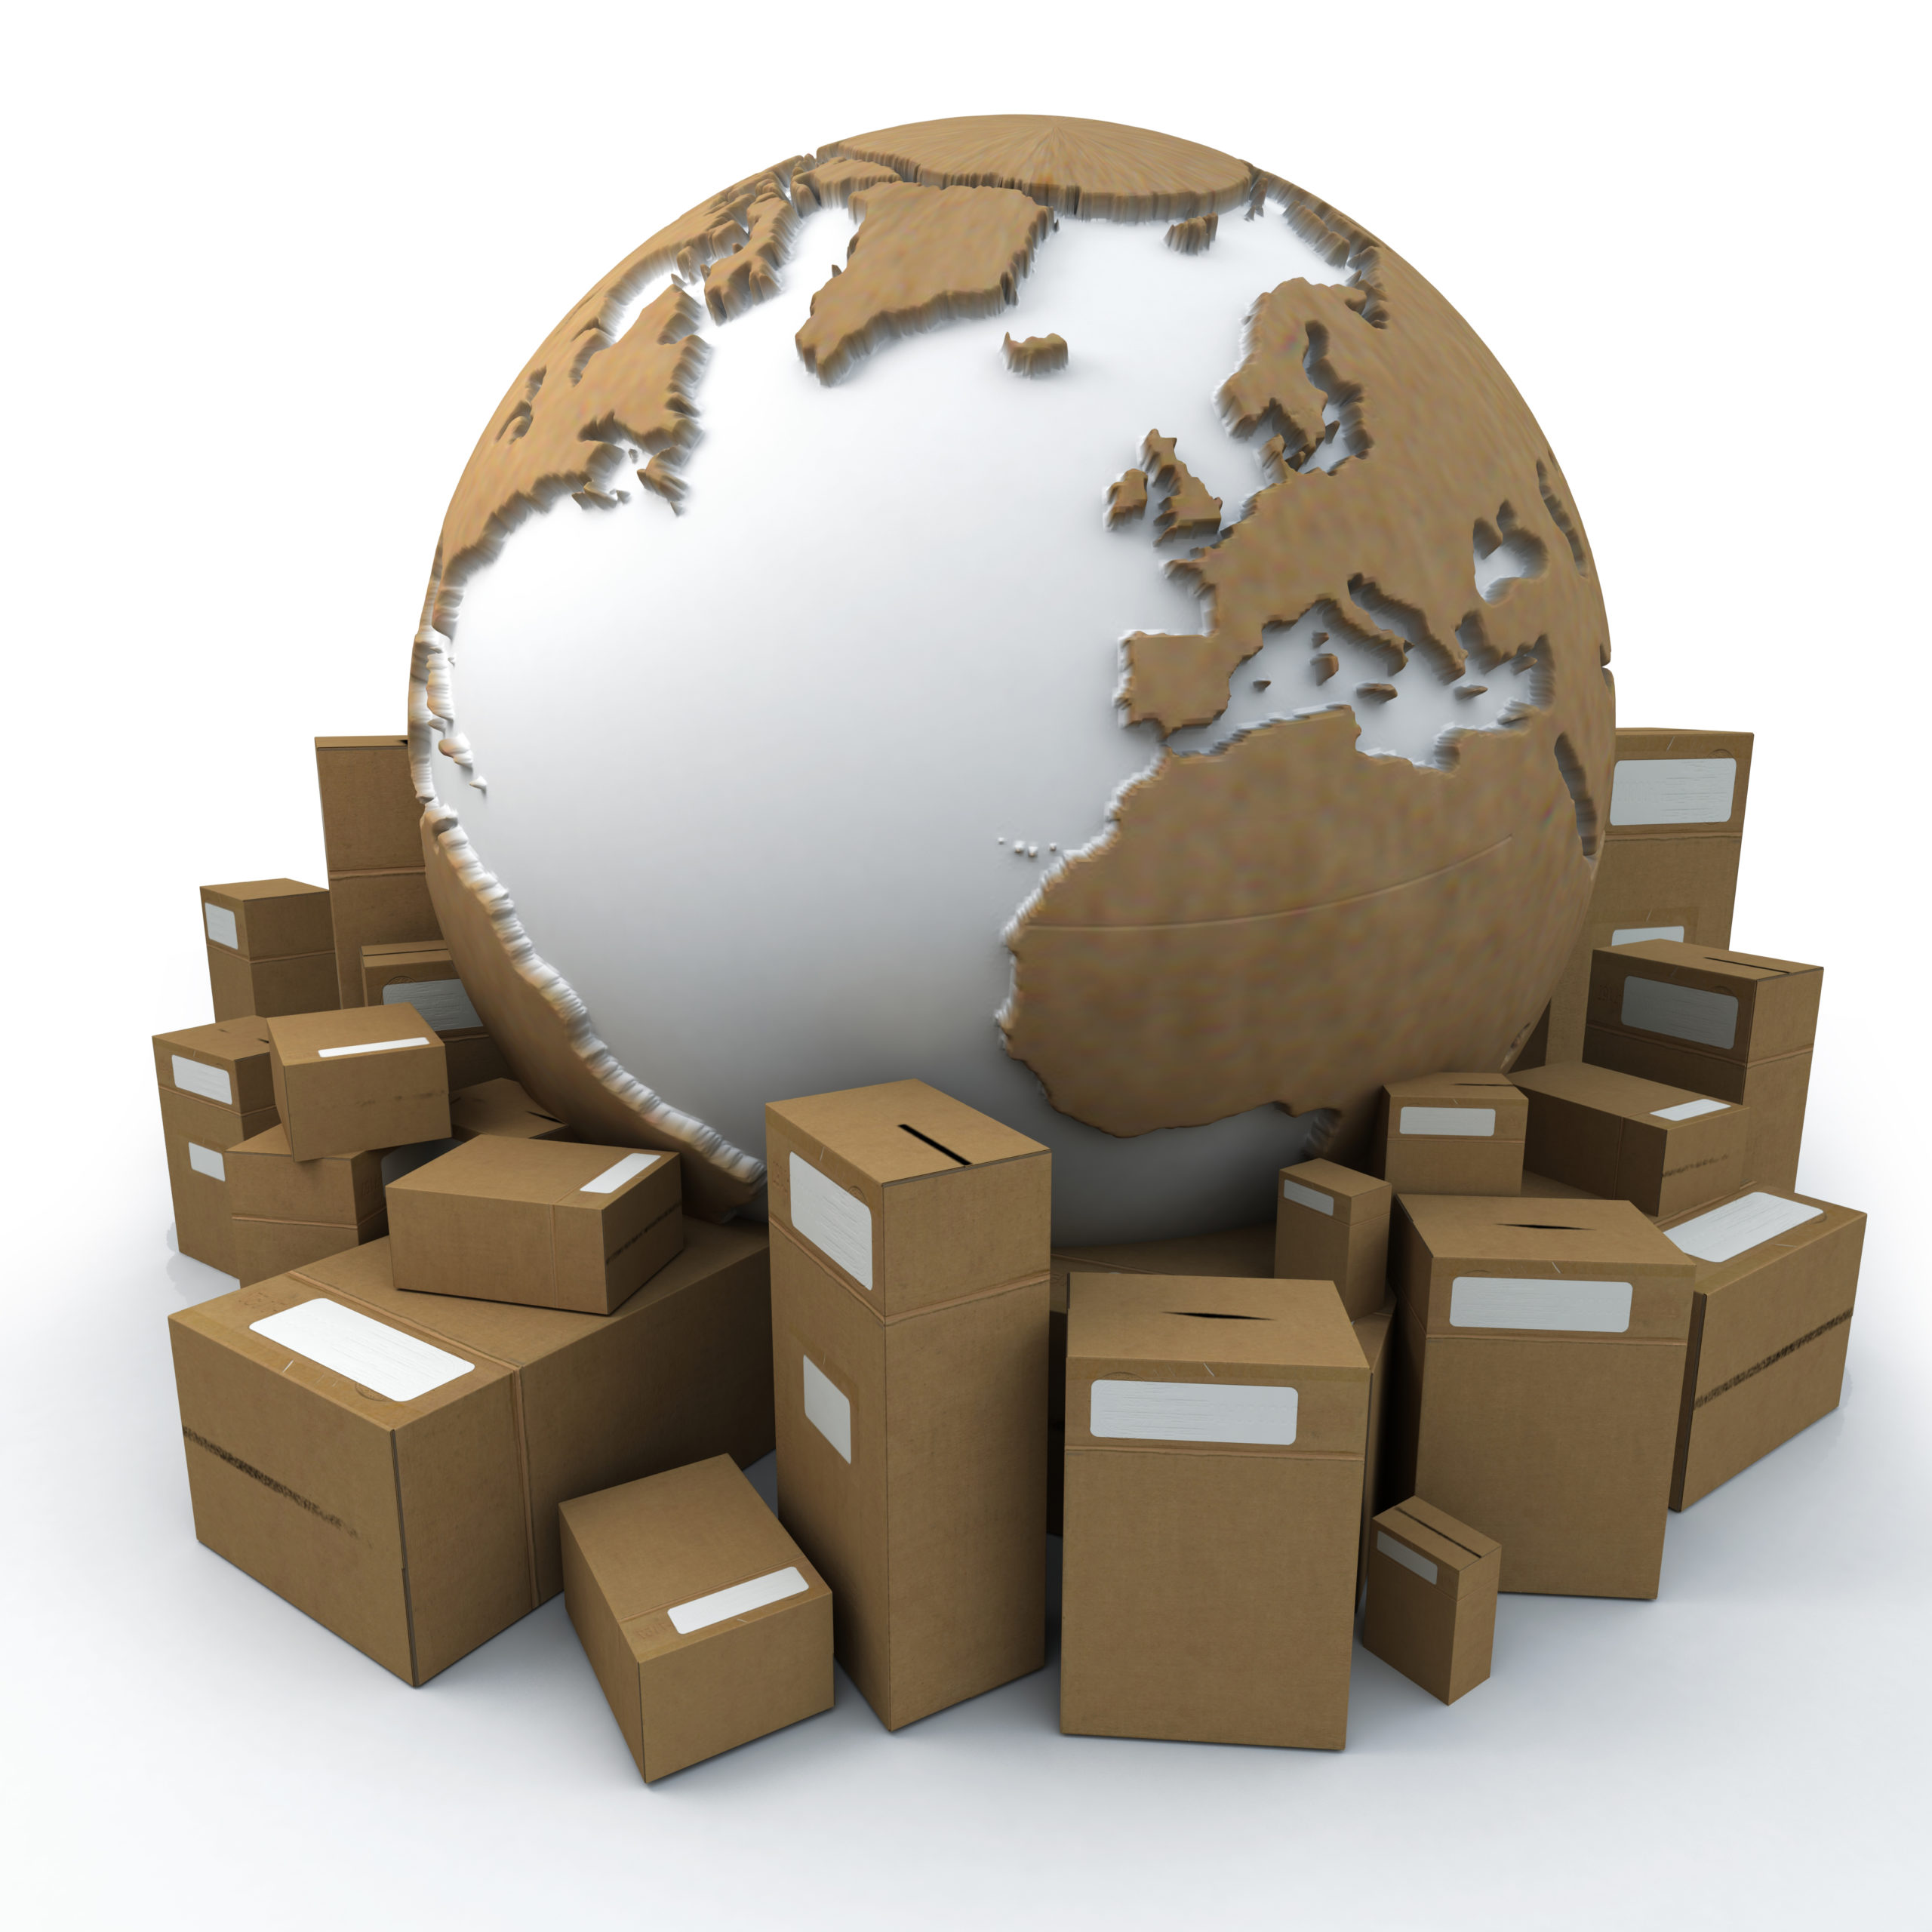 Boxes and Packaging in front of a globe